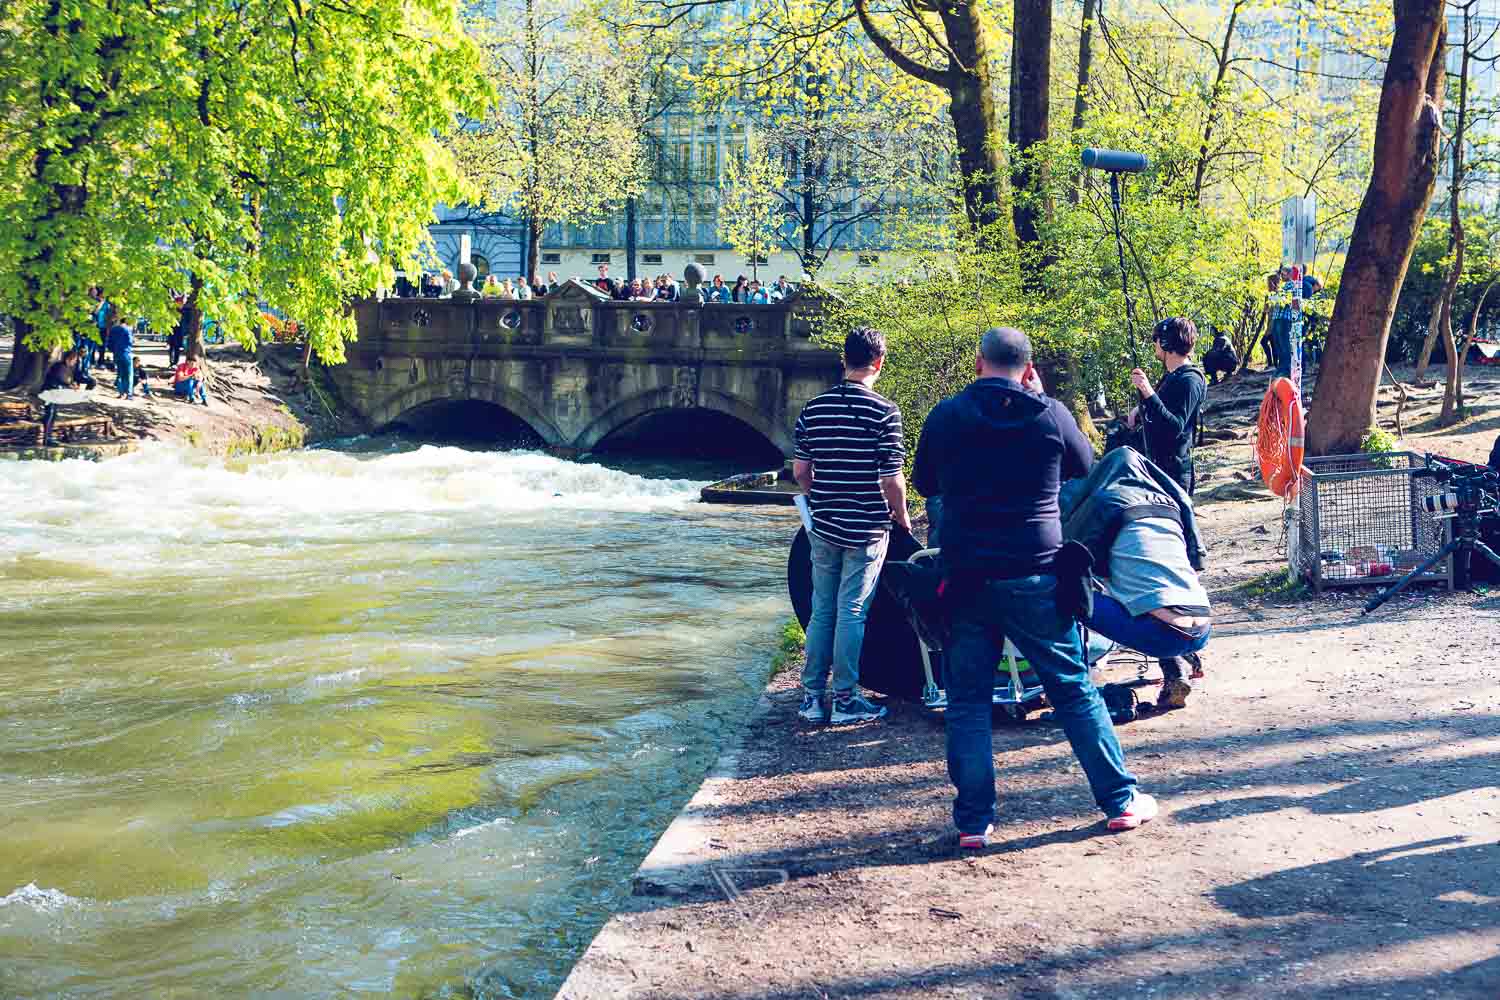 Eisbachwelle Munich - Surfing in the Eisbach - Canon advertising shoot - Surfing on the Eisbach Munich - Come and See - Canon commercial shoot - Tao, Karina, Alex - Samo Vidic - Campaign Fall 2016 - Autumn/Winter 16/17 - Surfing on the Eisbach, Munich, Prinzregentenstraße